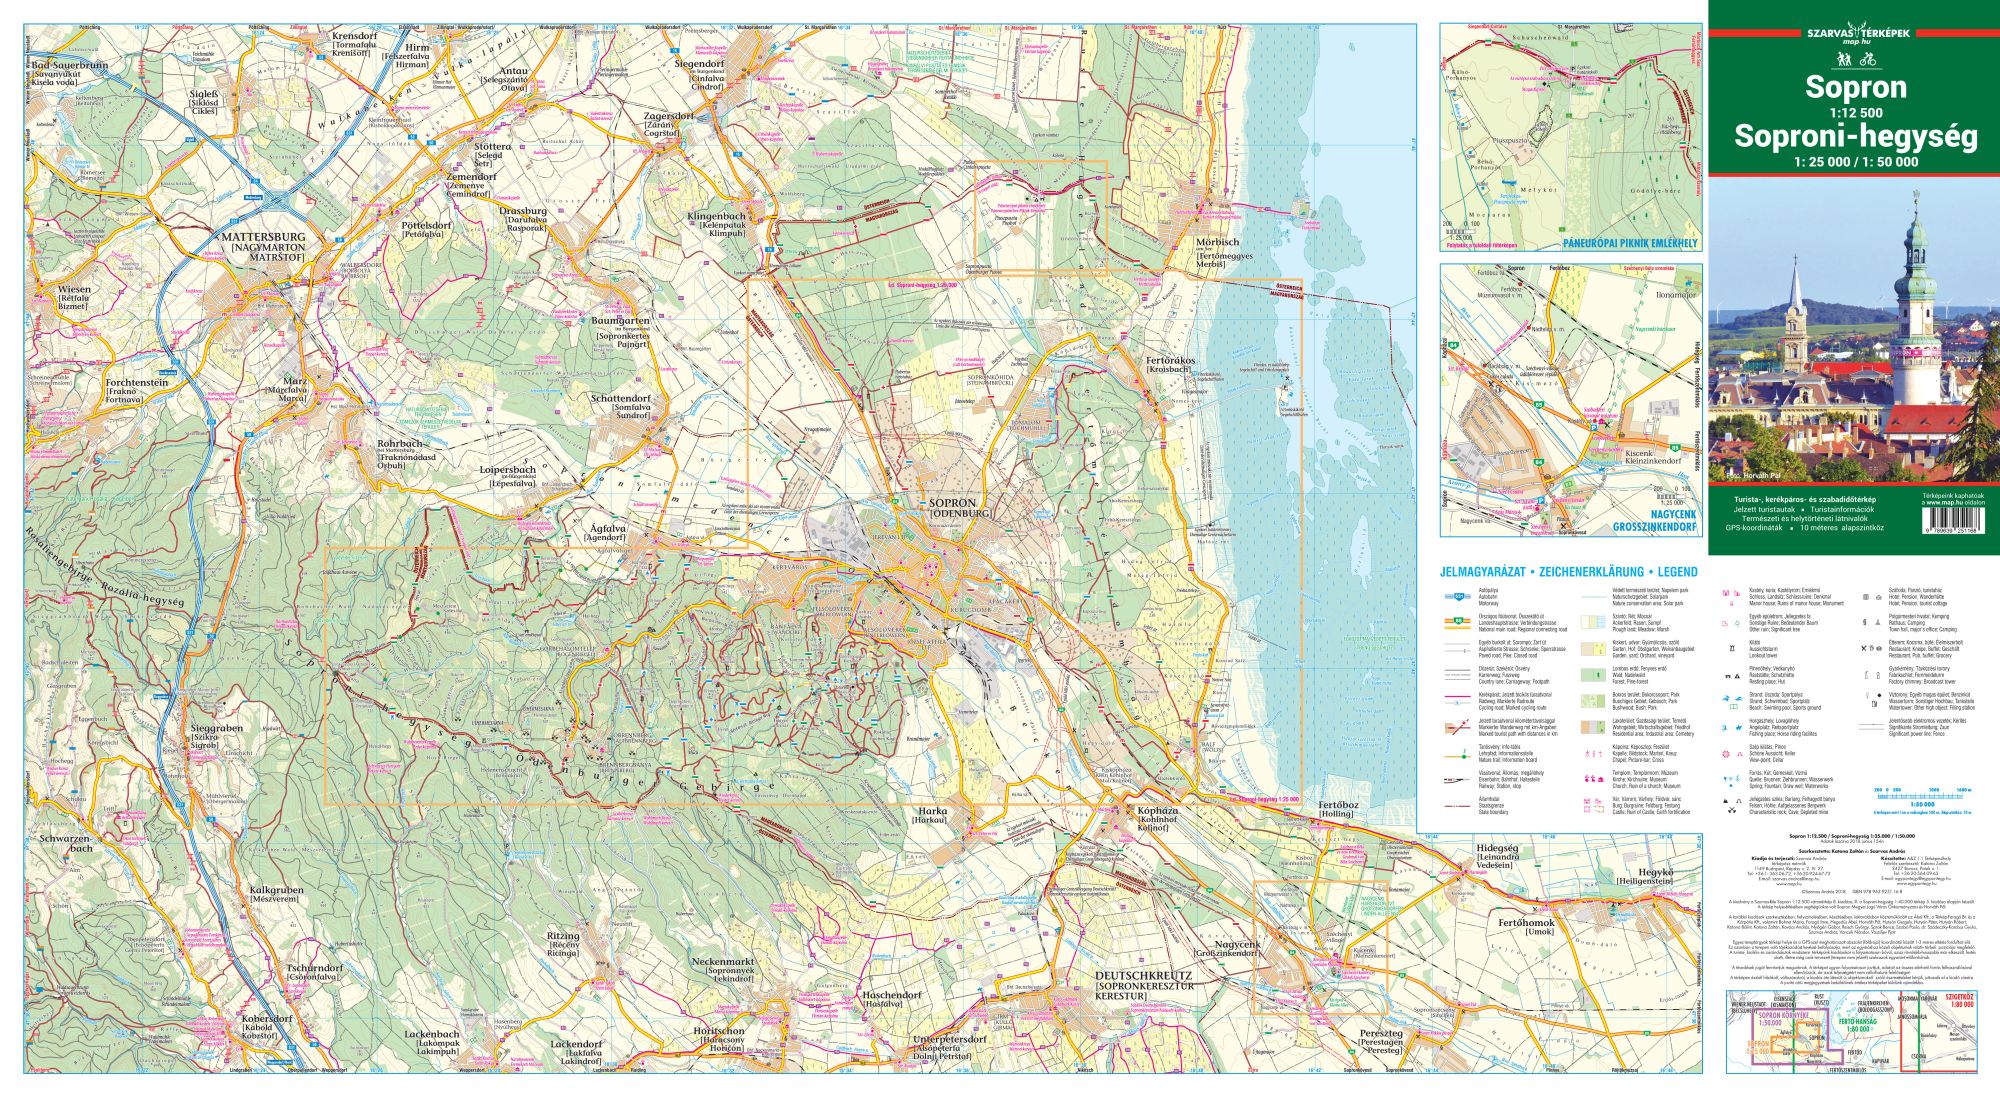 Area covered by the map Sopron hills 1:50.000